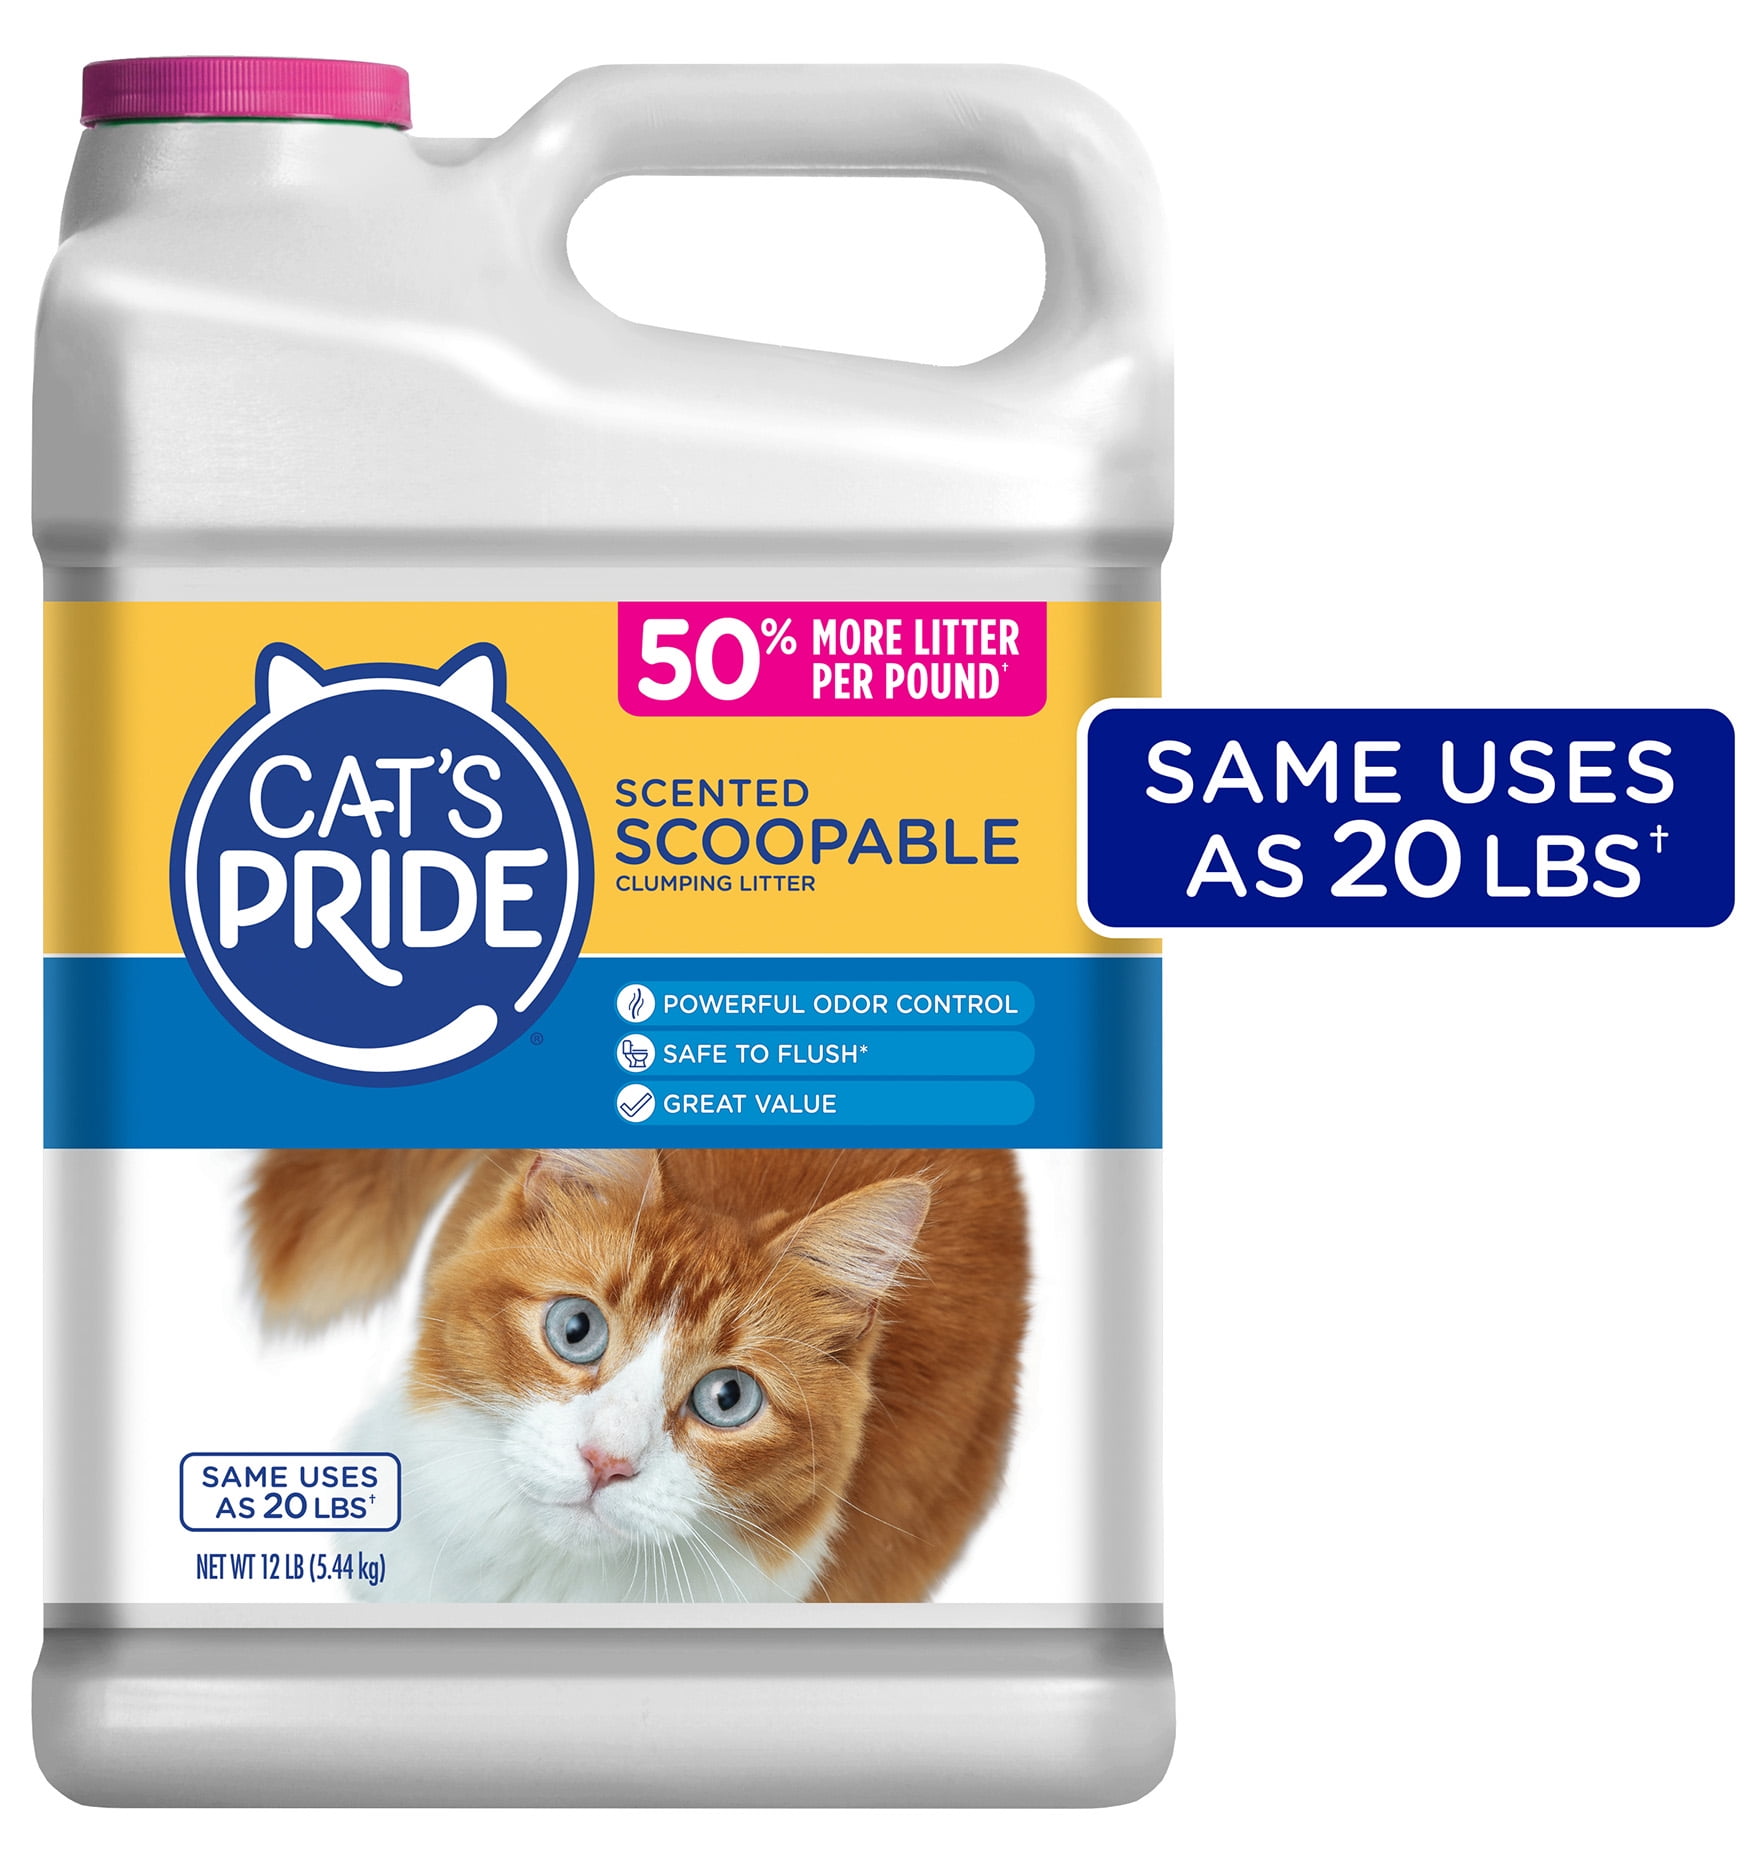 Cats Pride Cat Litter Scoopable, Scented Lightweight Clumping Litter